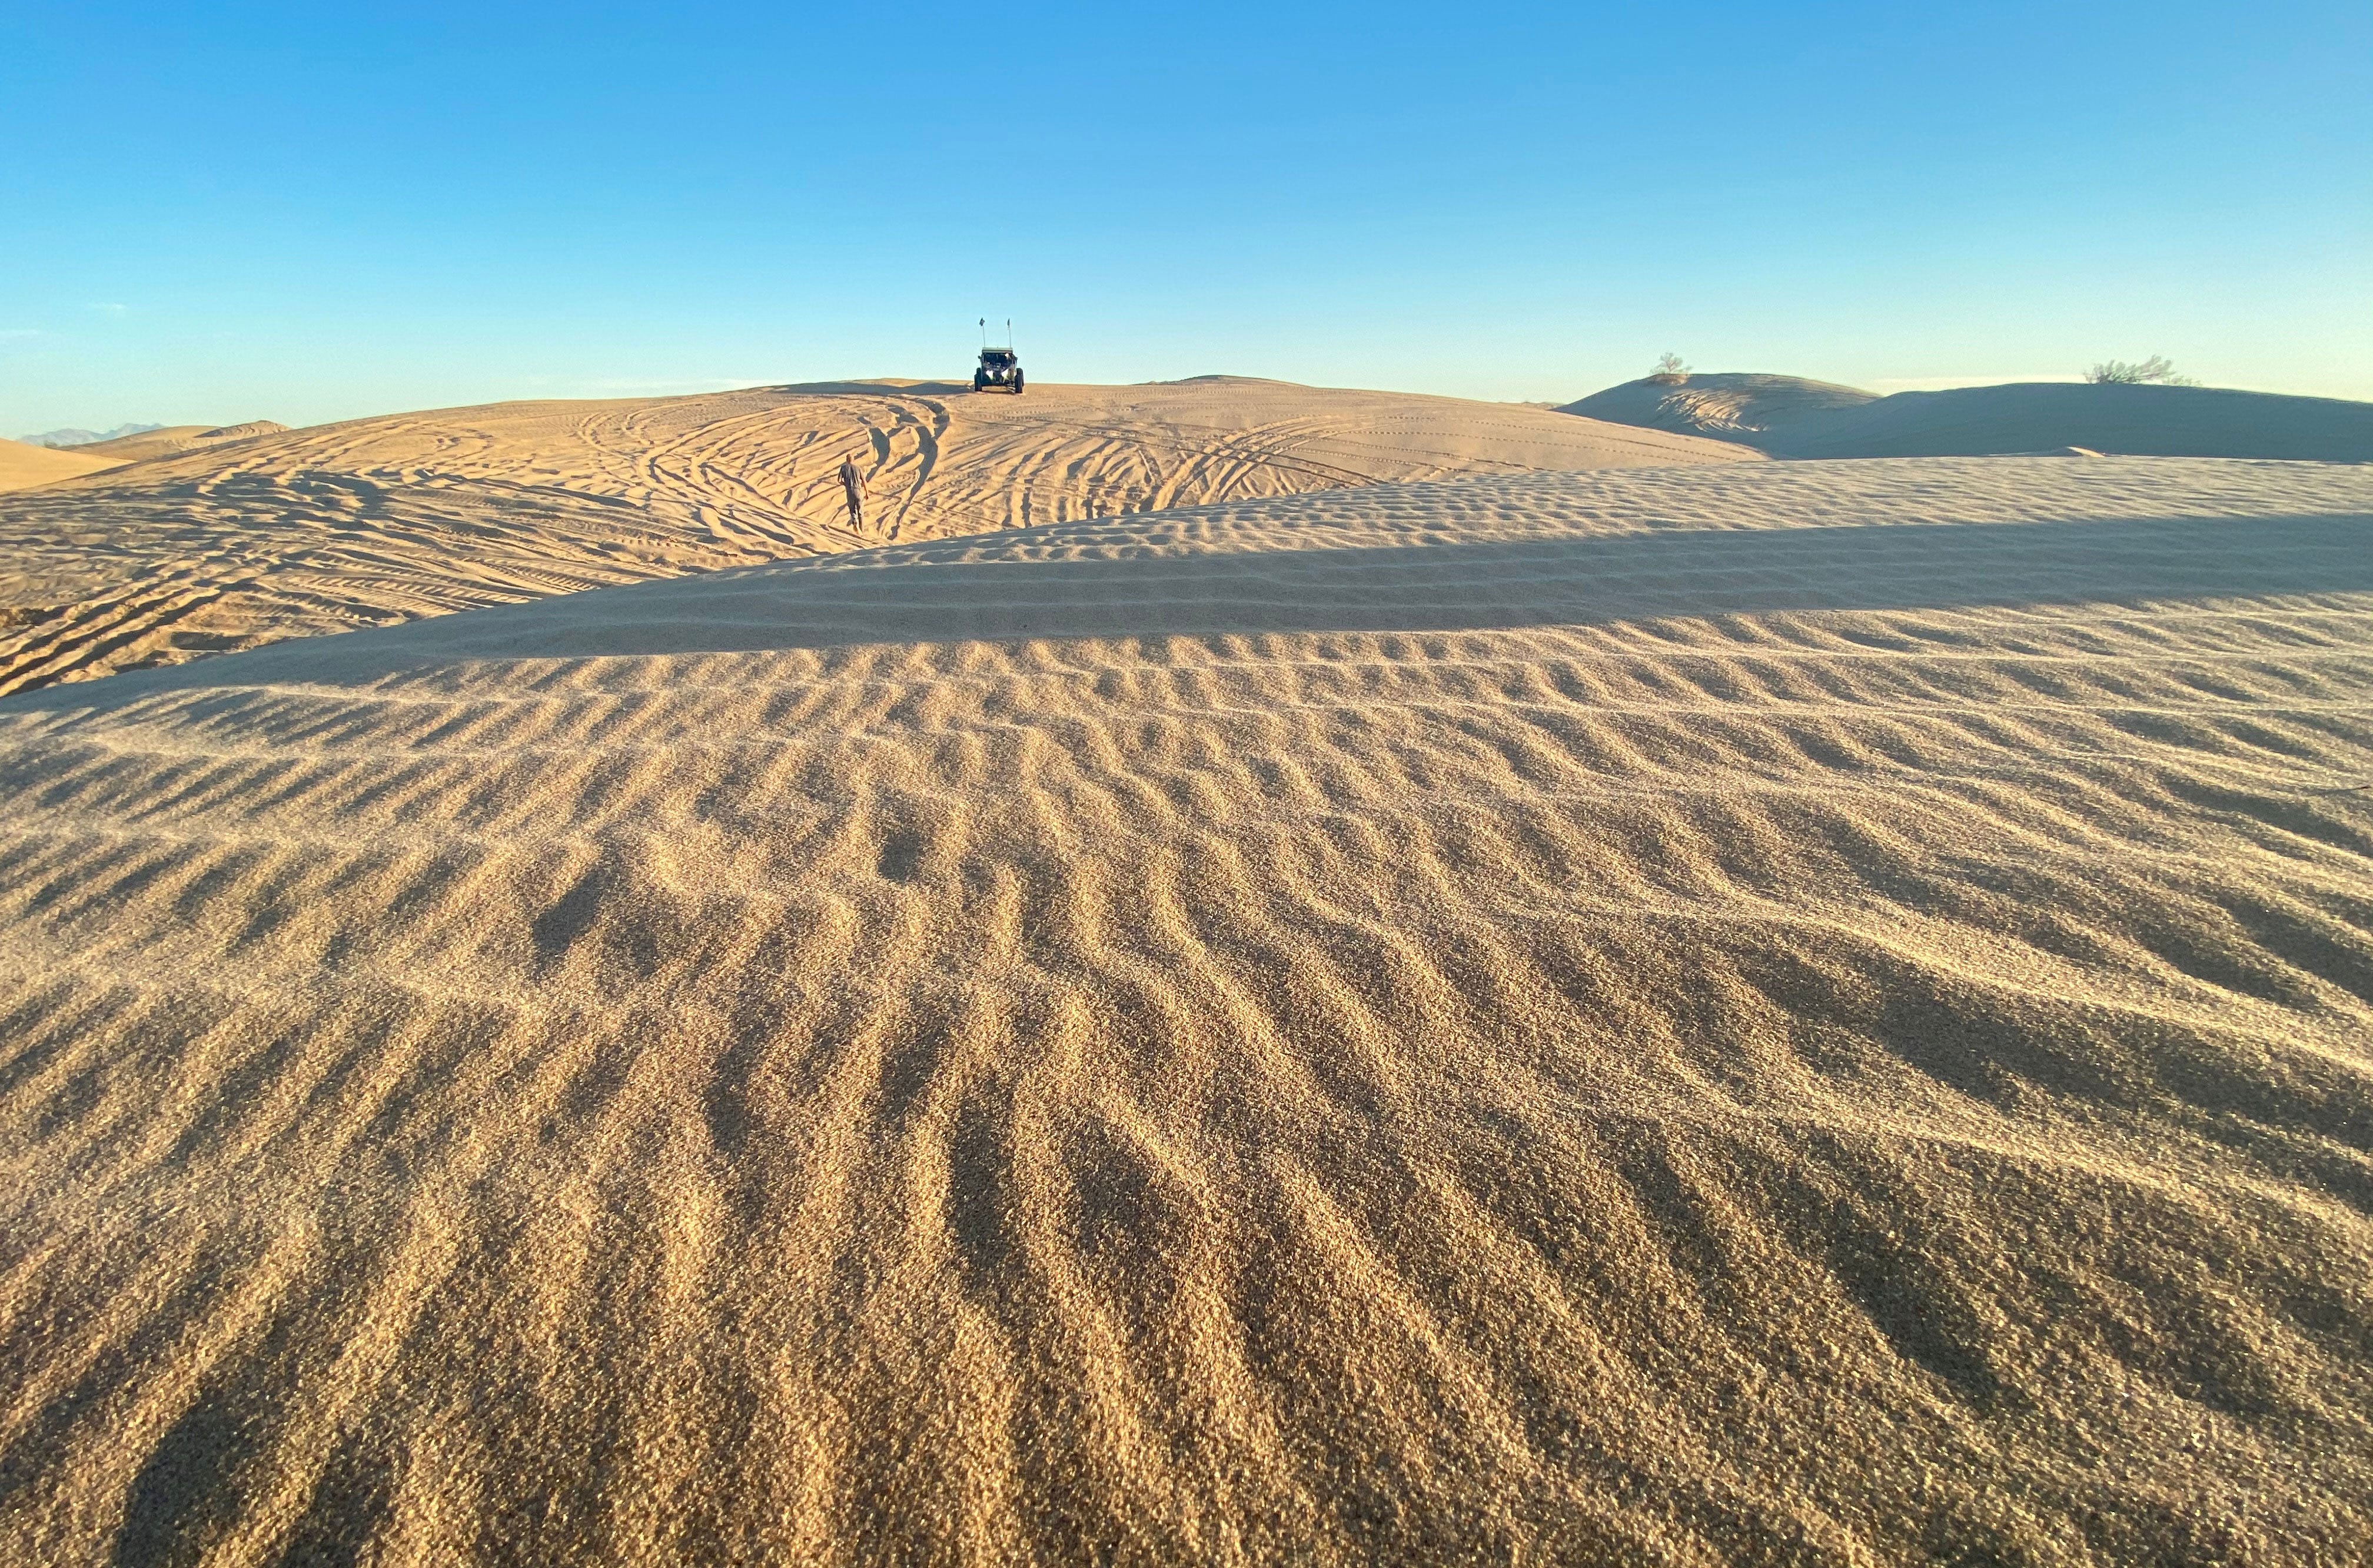 UTV in the distance at the Imperial Sand Dunes